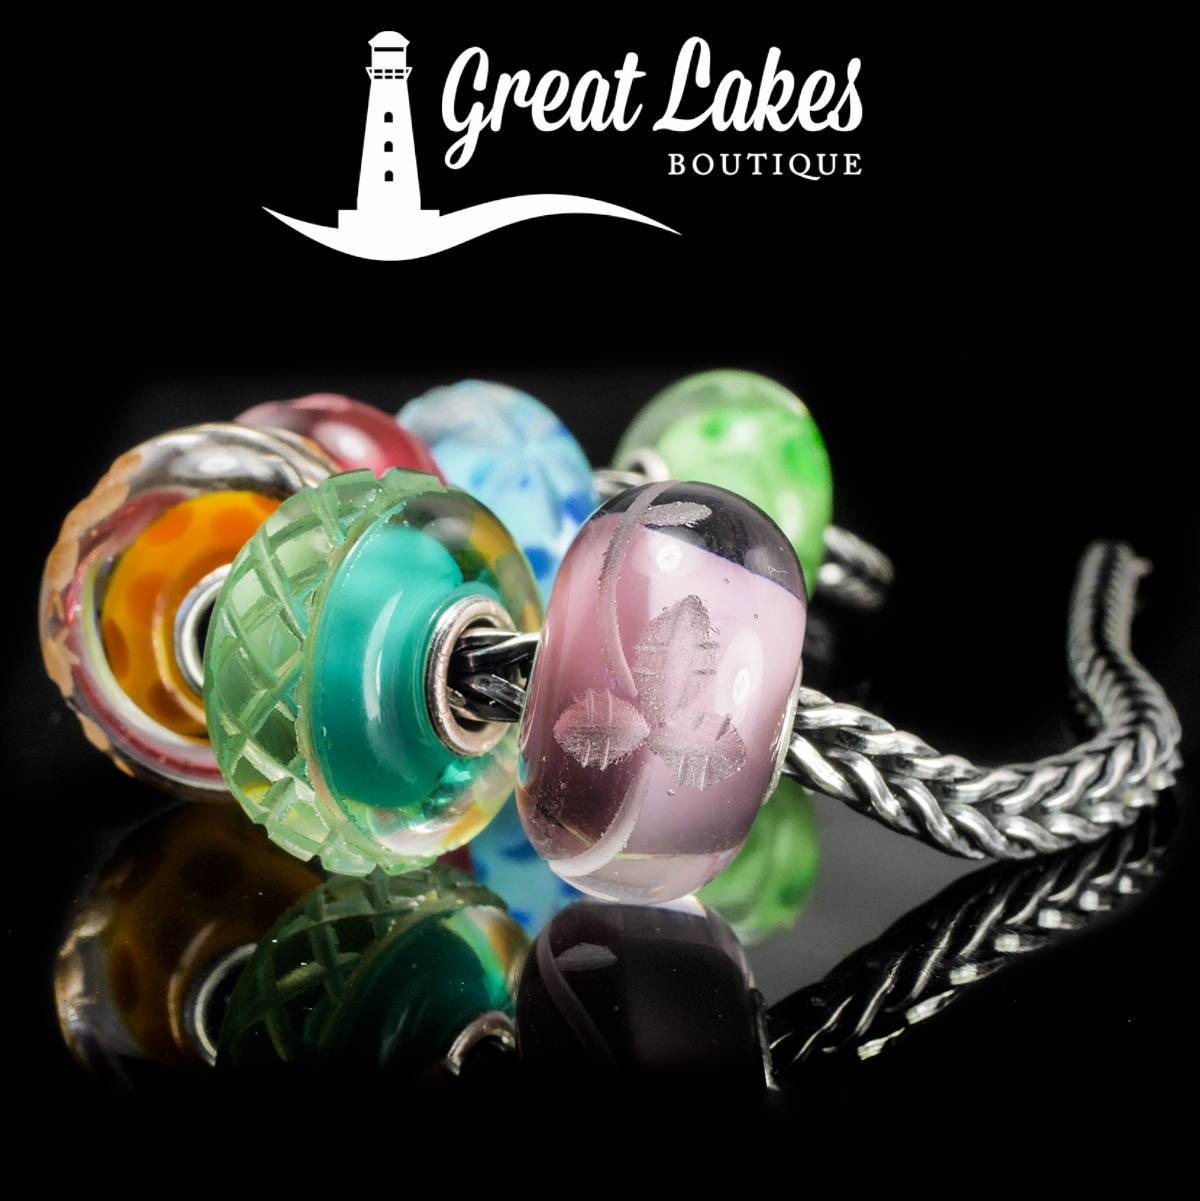 Trollbeads Day 2020 Live Images